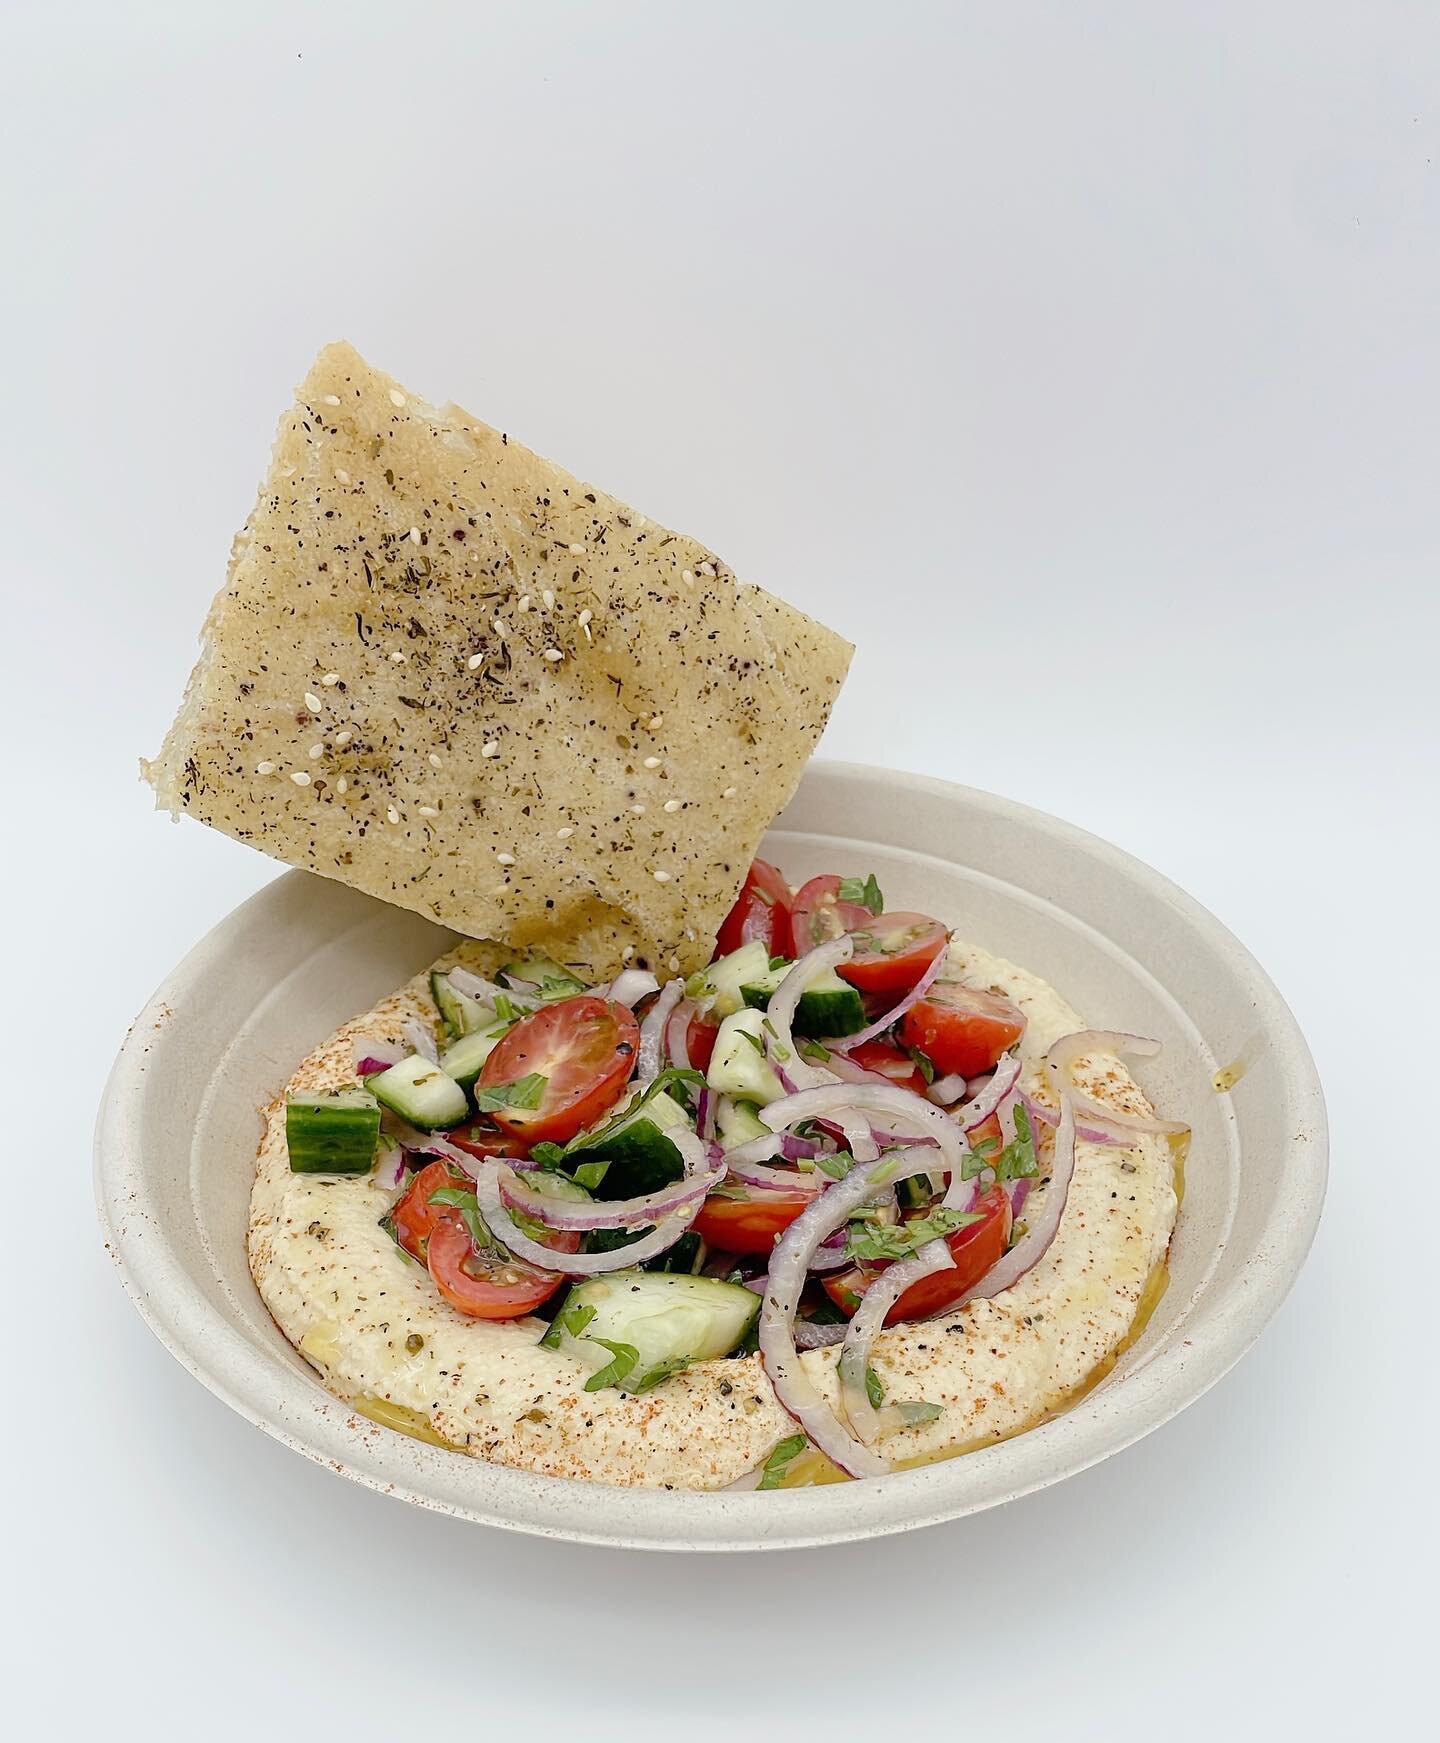 Hot and humid summer days in DC calls for our hummus bowl and lemonade!  Add a shot of your favorite booze, it is almost the weekend! #summereats #sospesoUM #hummusbowl #fresheats